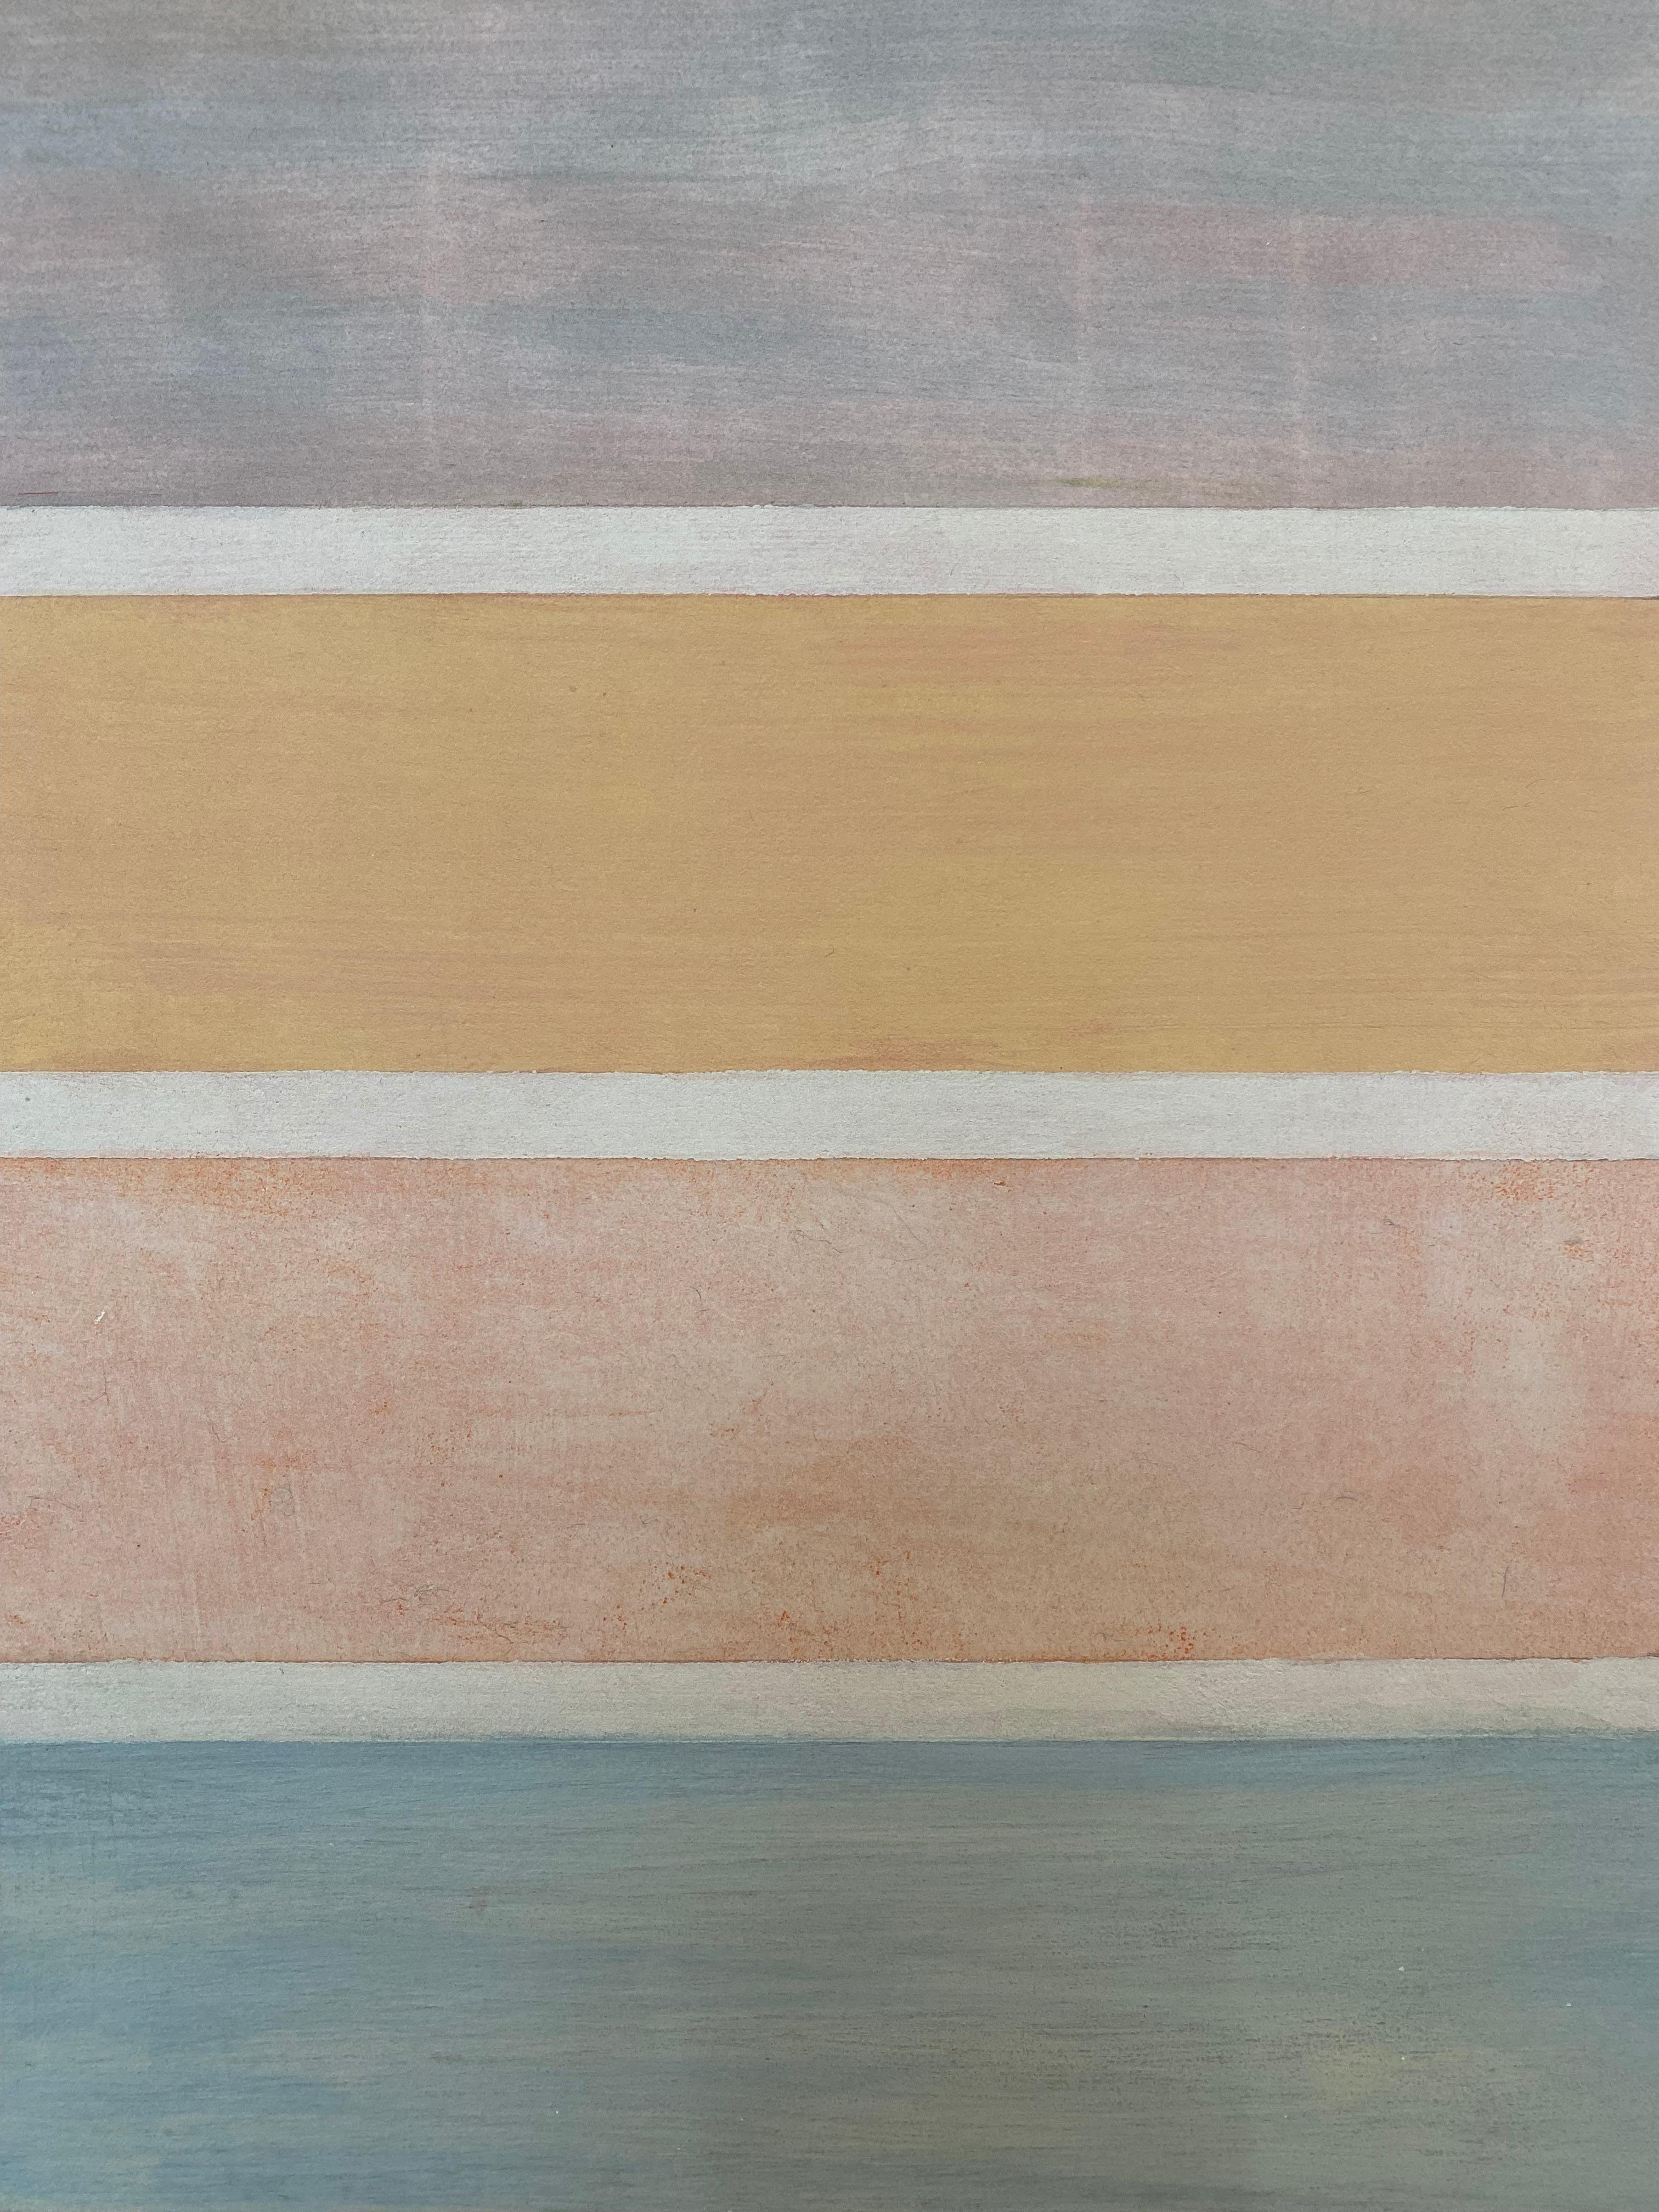 In this abstract painting on a shaped panel by Elizabeth Gourlay, carefully ordered blocks of color in salmon, peach and mauve are luminous against thinner neutral sections of exposed linen. Signed, dated and titled on verso.

Elizabeth Gourlay’s